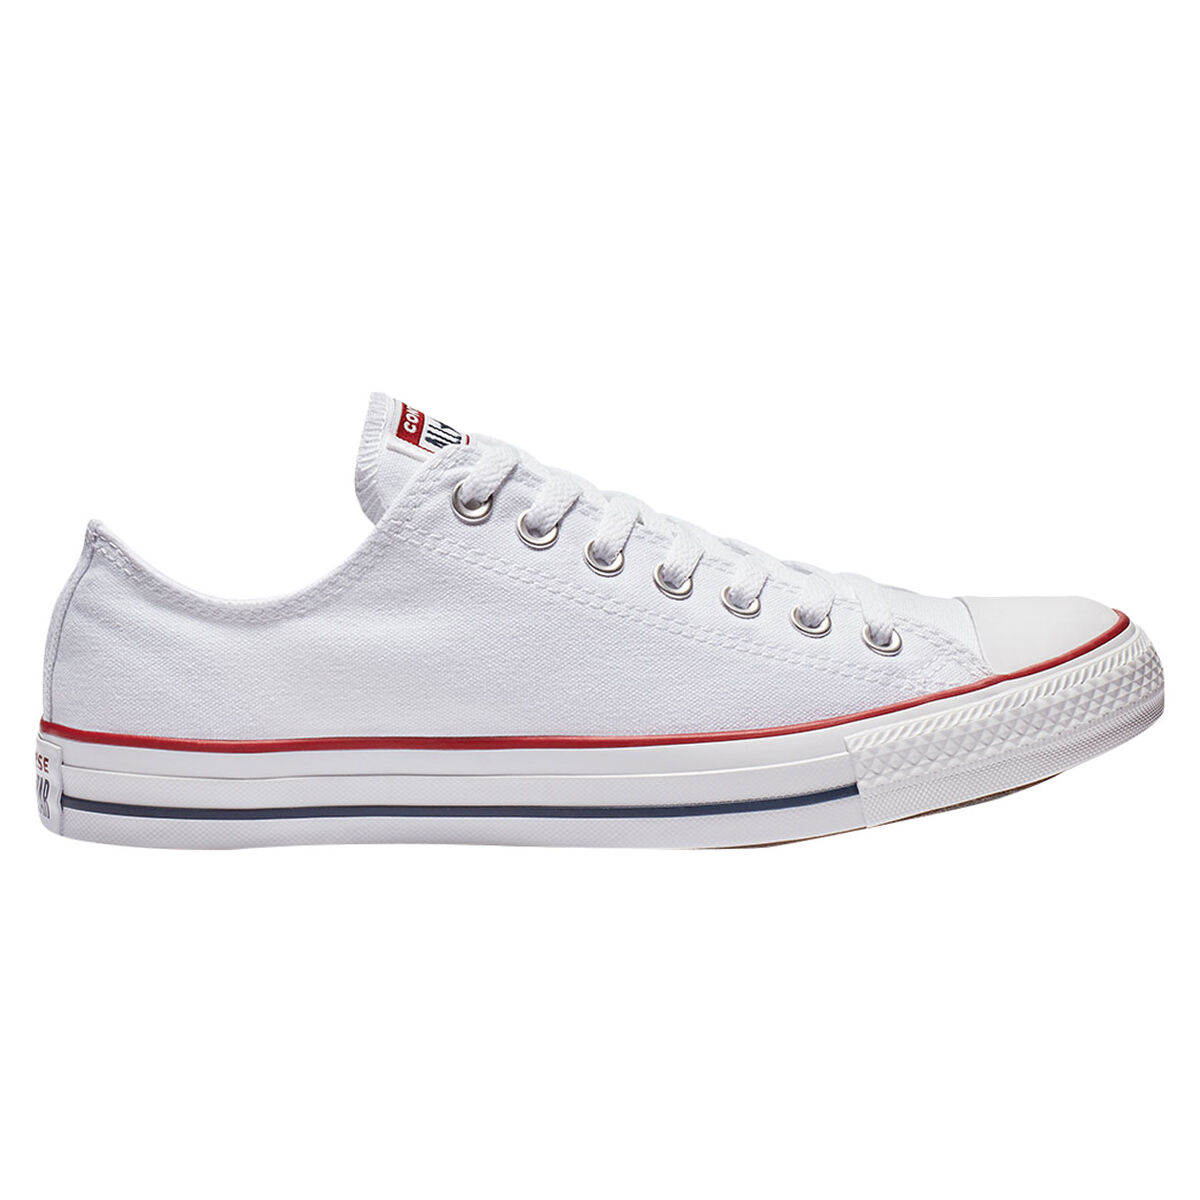 Women's Converse Sneakers & Athletic Shoes | Nordstrom